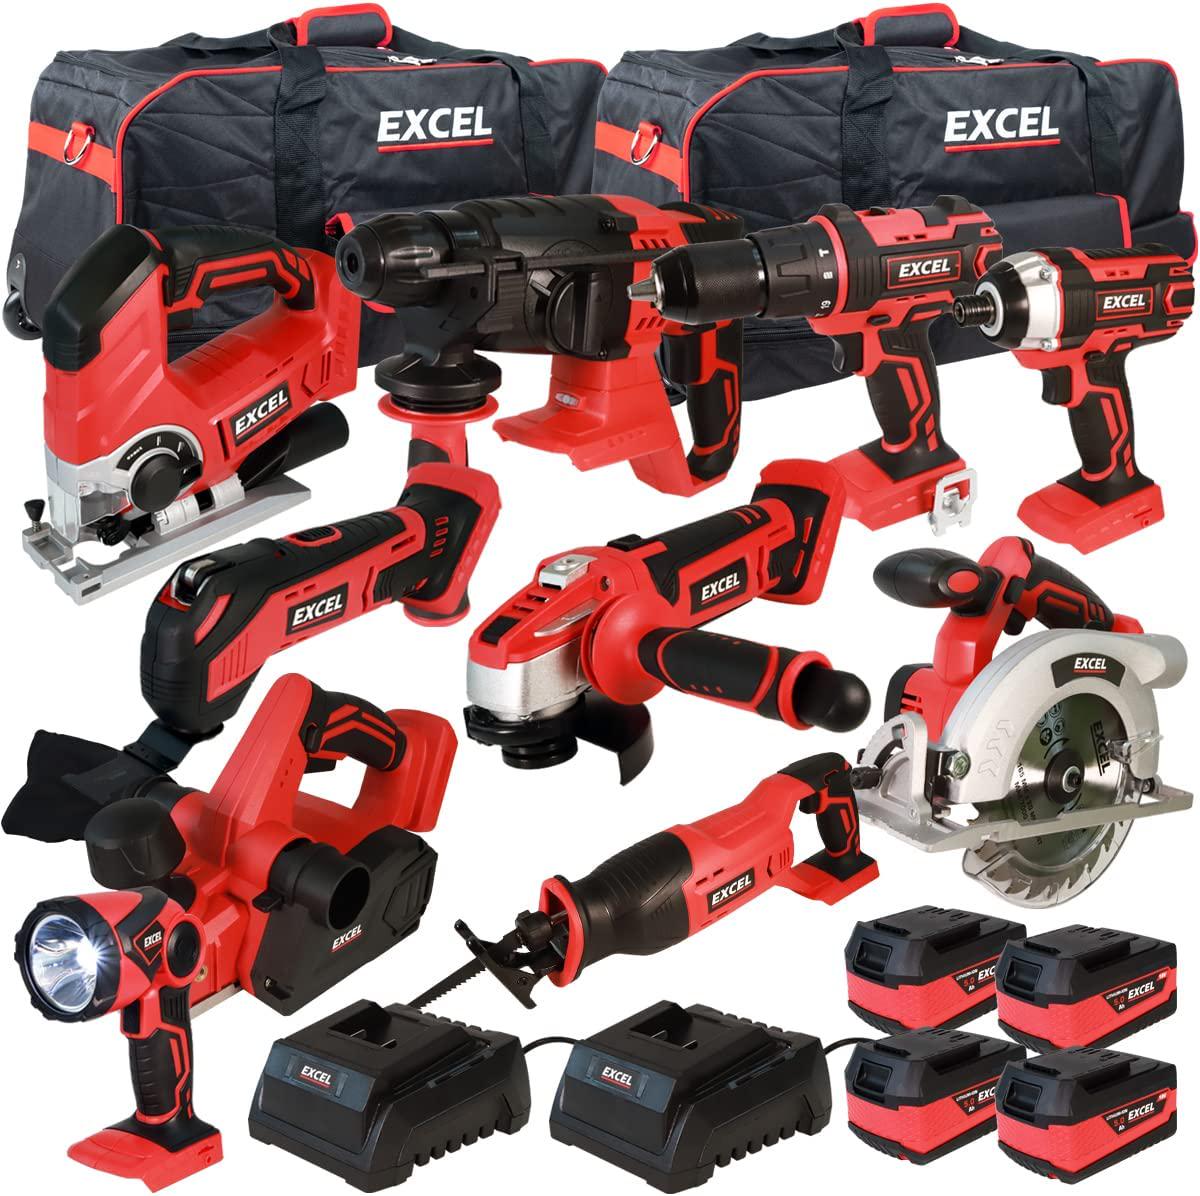 Excel, Excel 18V 10 Piece Cordless Li-ion Power Tool Kit with 4 x 5.0Ah Batteries and Charger in Bag EXL13231KIT - Monster Power Tool Kit - Combo Kit - 18V Cordless Power Tool Kits - Mega Power Tool